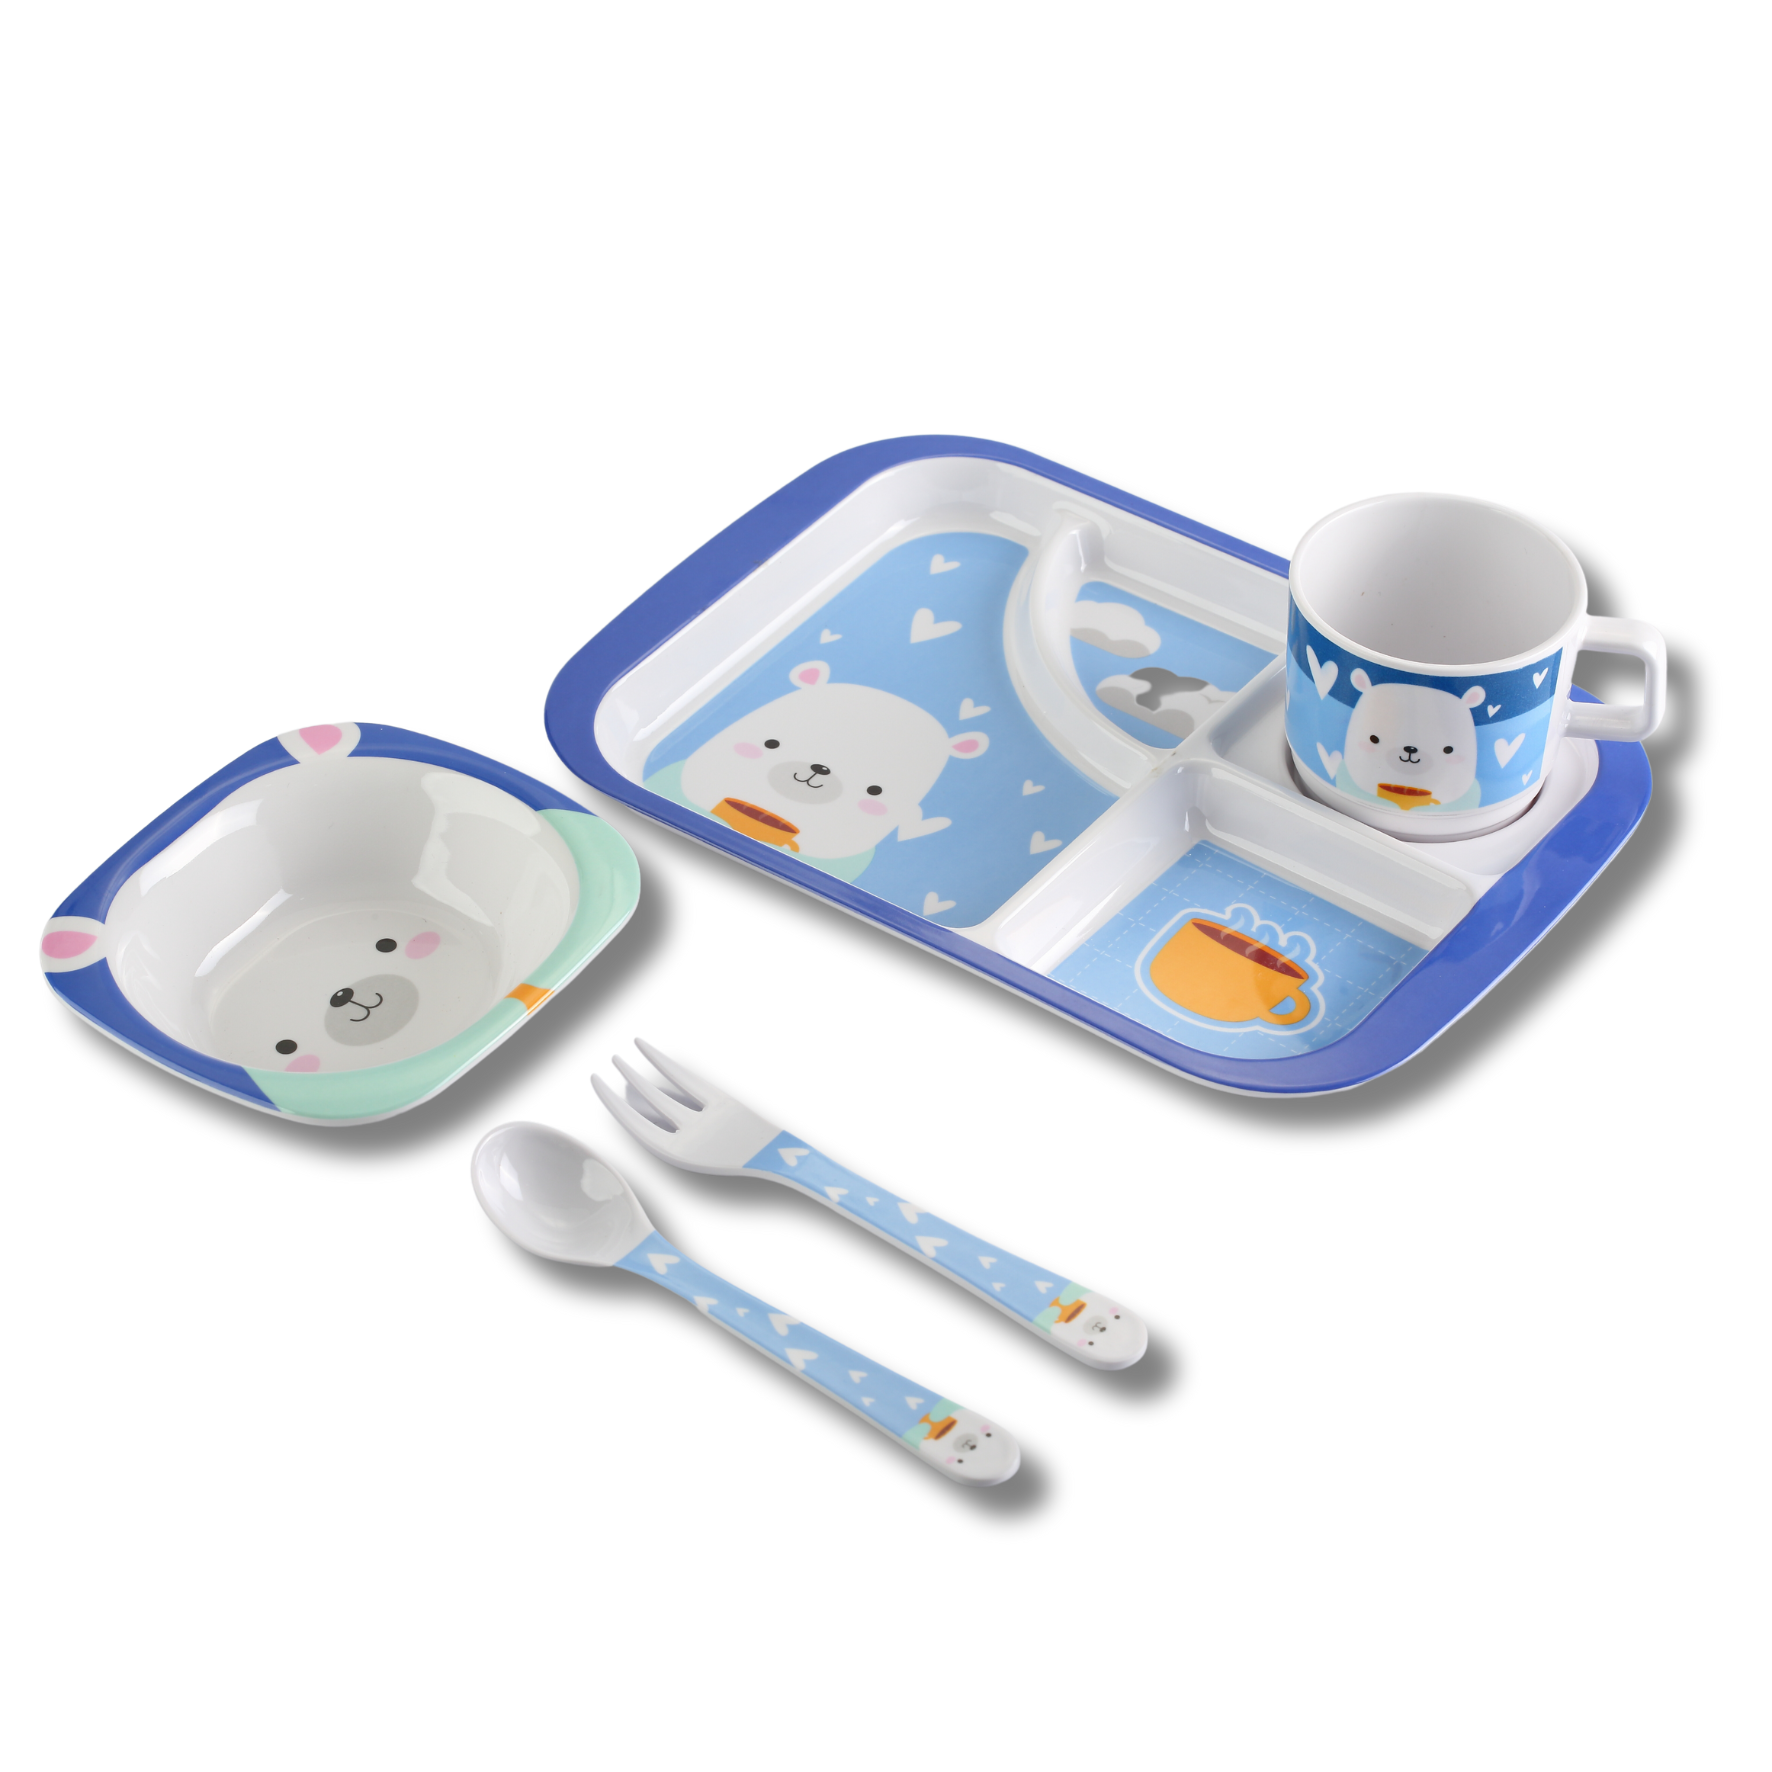 The Plate Story - 5 Pcs Krazy Healthy Plate Set - Bunny